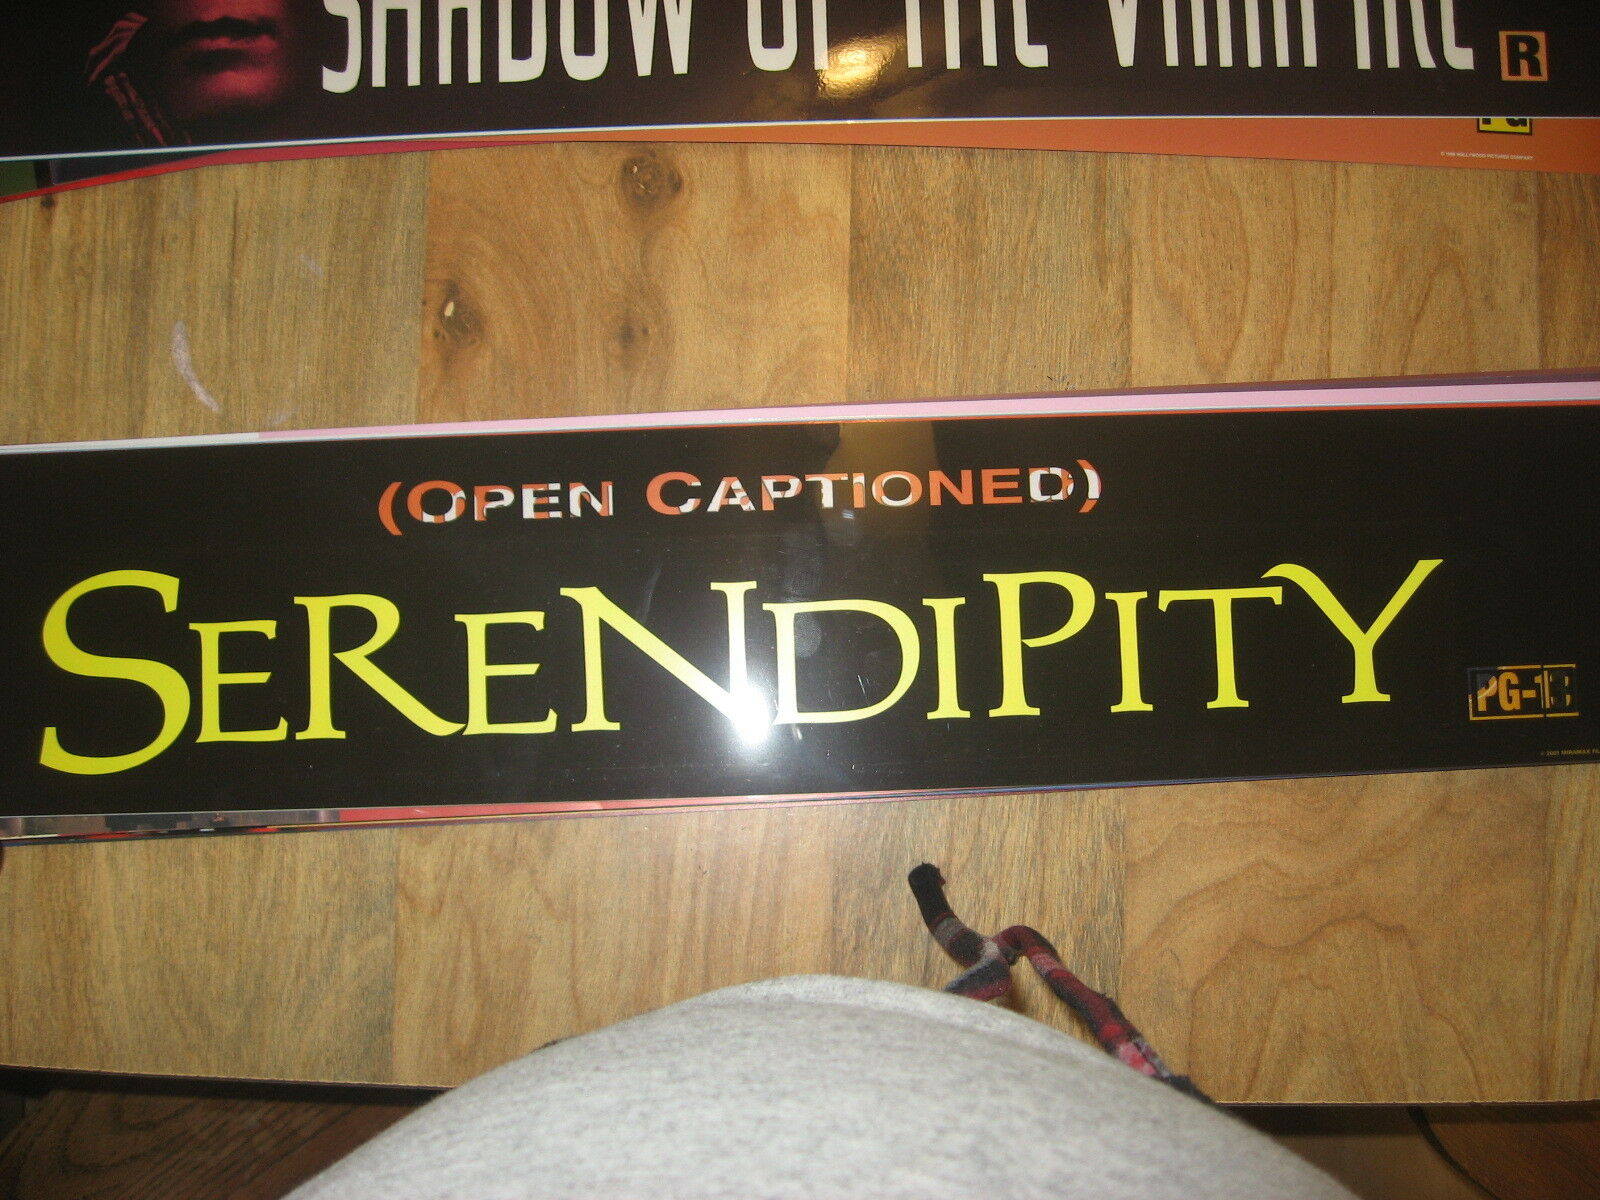 Theater Marquee Mylar Serendipity